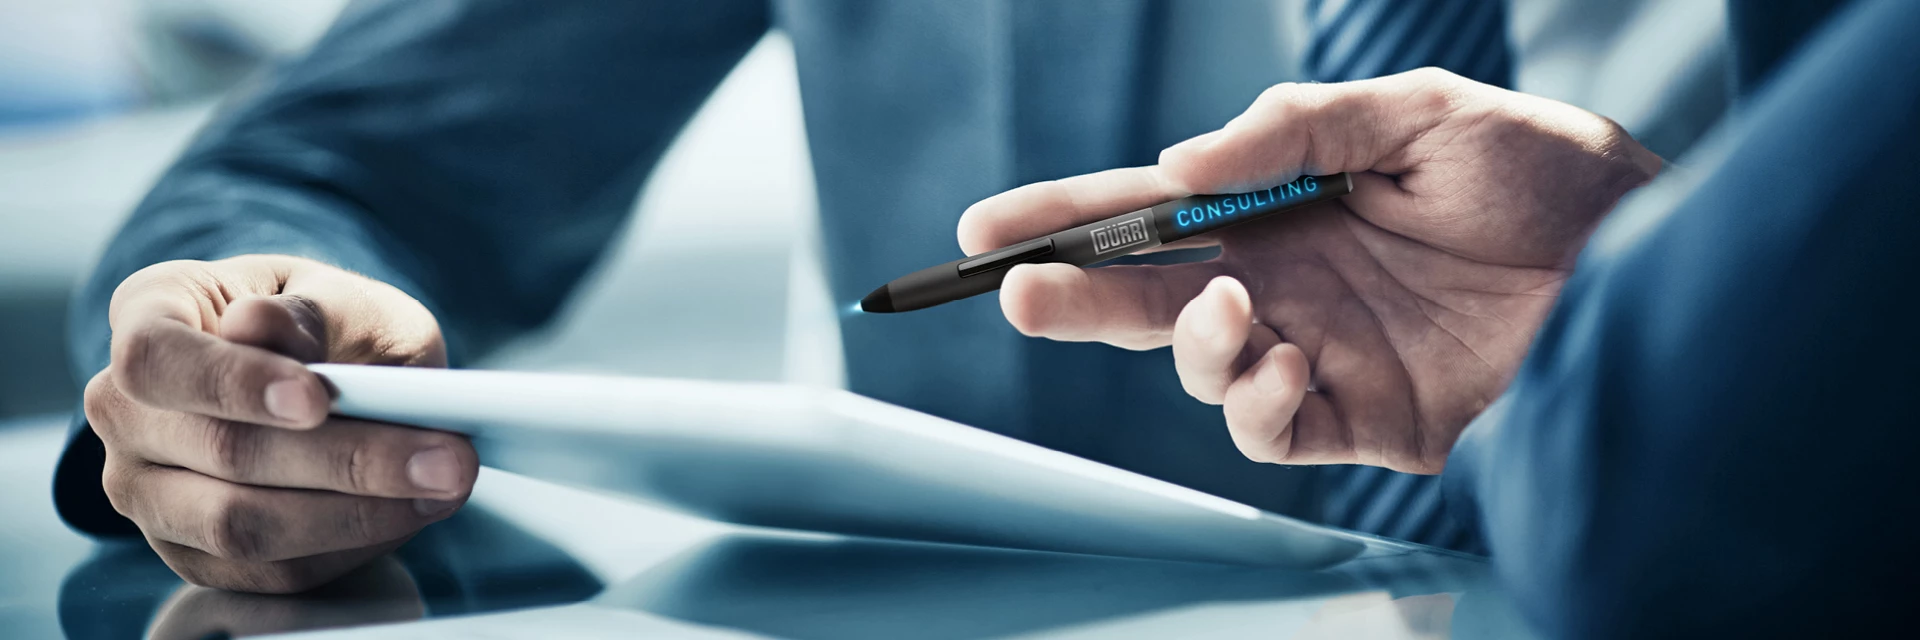 duerr-consulting-expertsDürr Consulting's consulting services represented by a hand holding a tablet pen with the Dürr Consulting logo illuminated. 